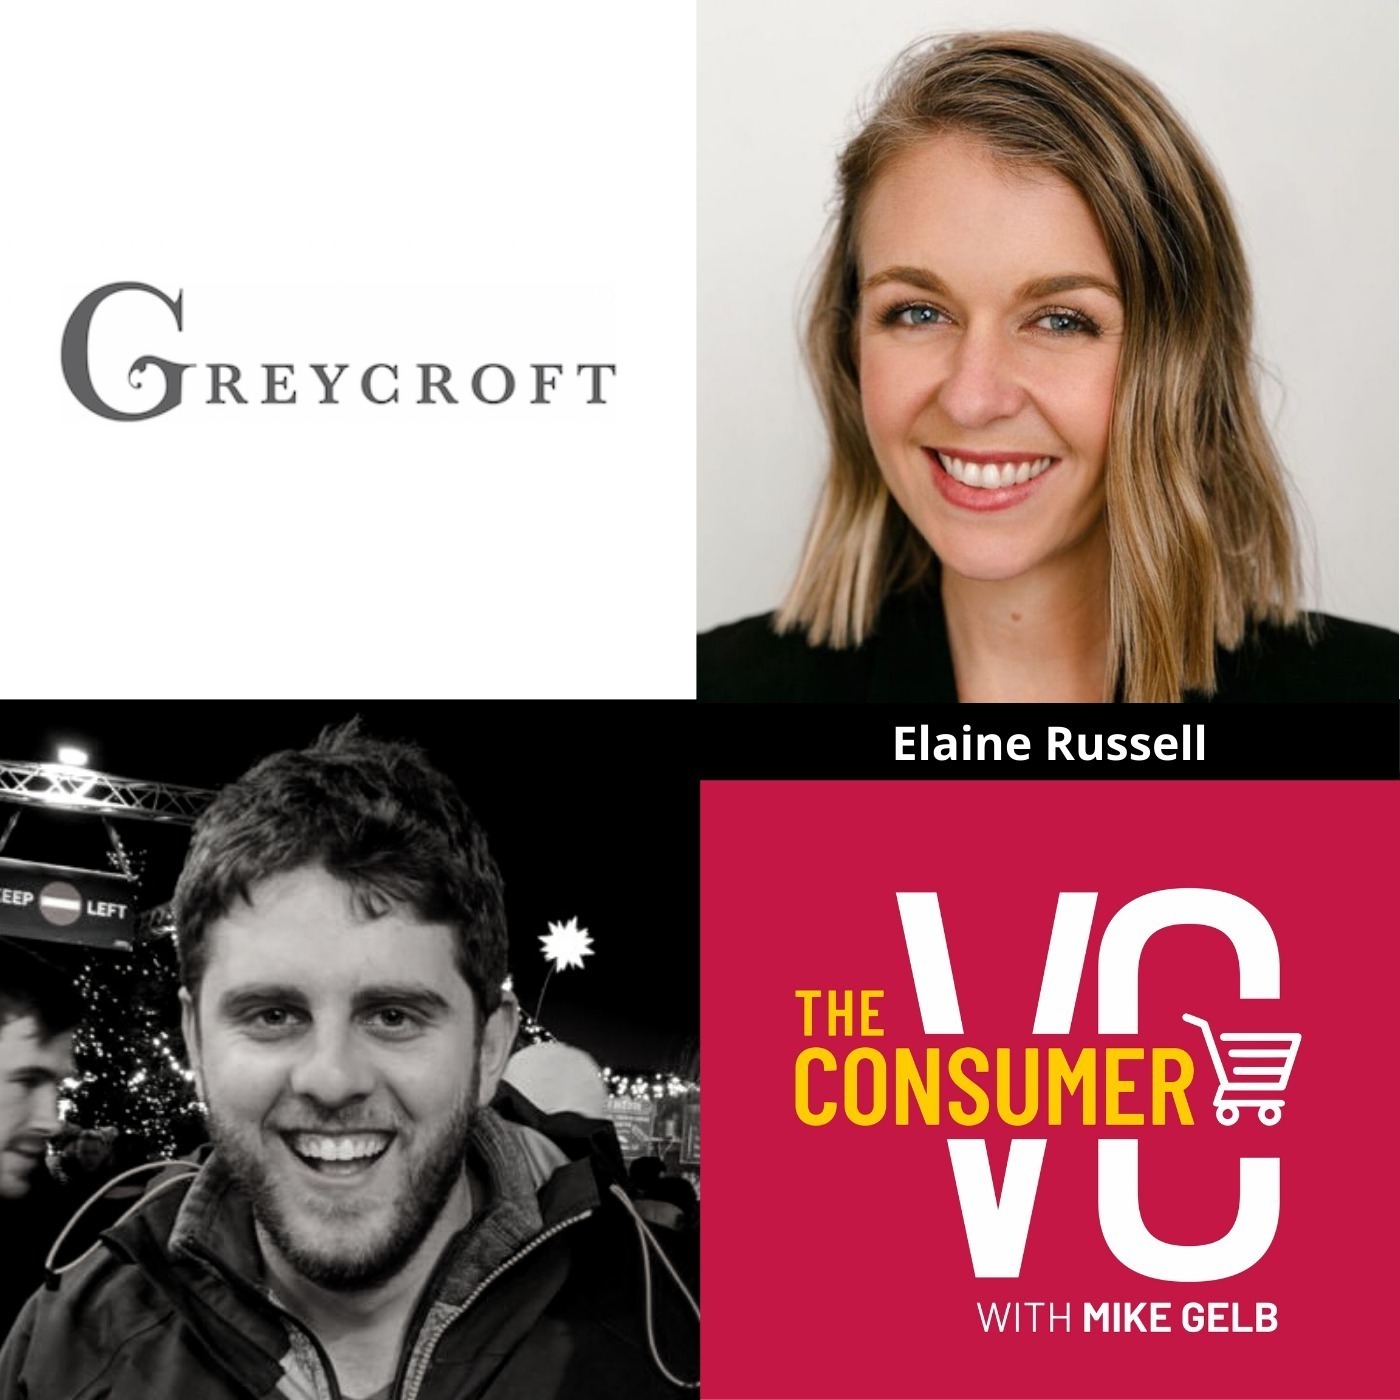 Elaine Russell (Greycroft) - The Future of Retail, How to Choose a Co-Founder, and Running a Single LP Fund